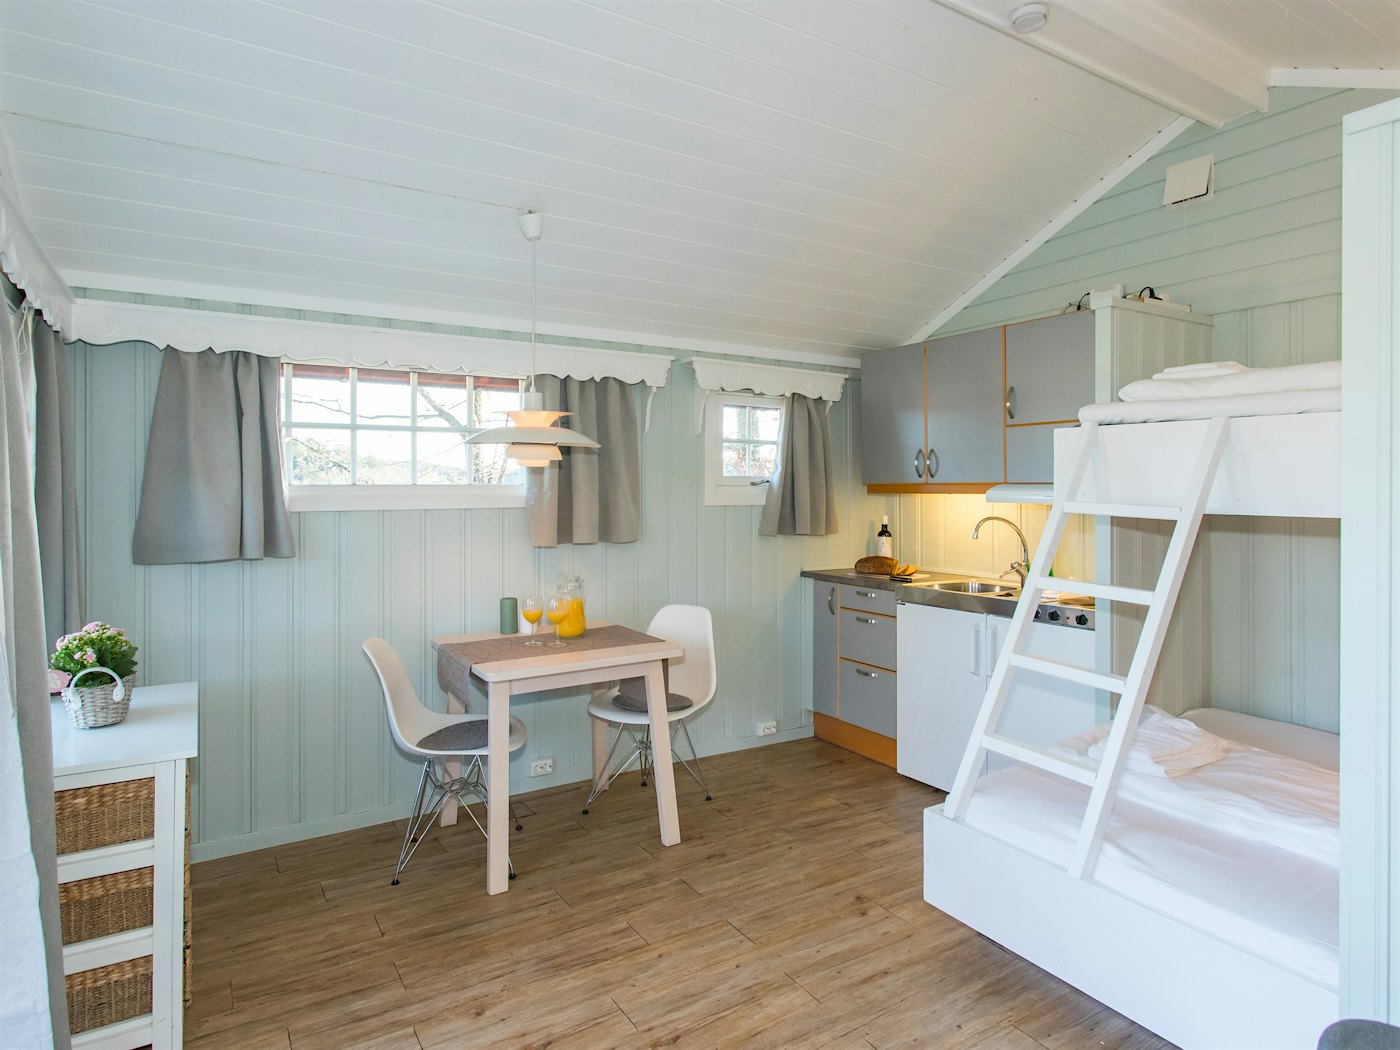 Bright room with family bunk bed, dining table and kitchenette. Photo